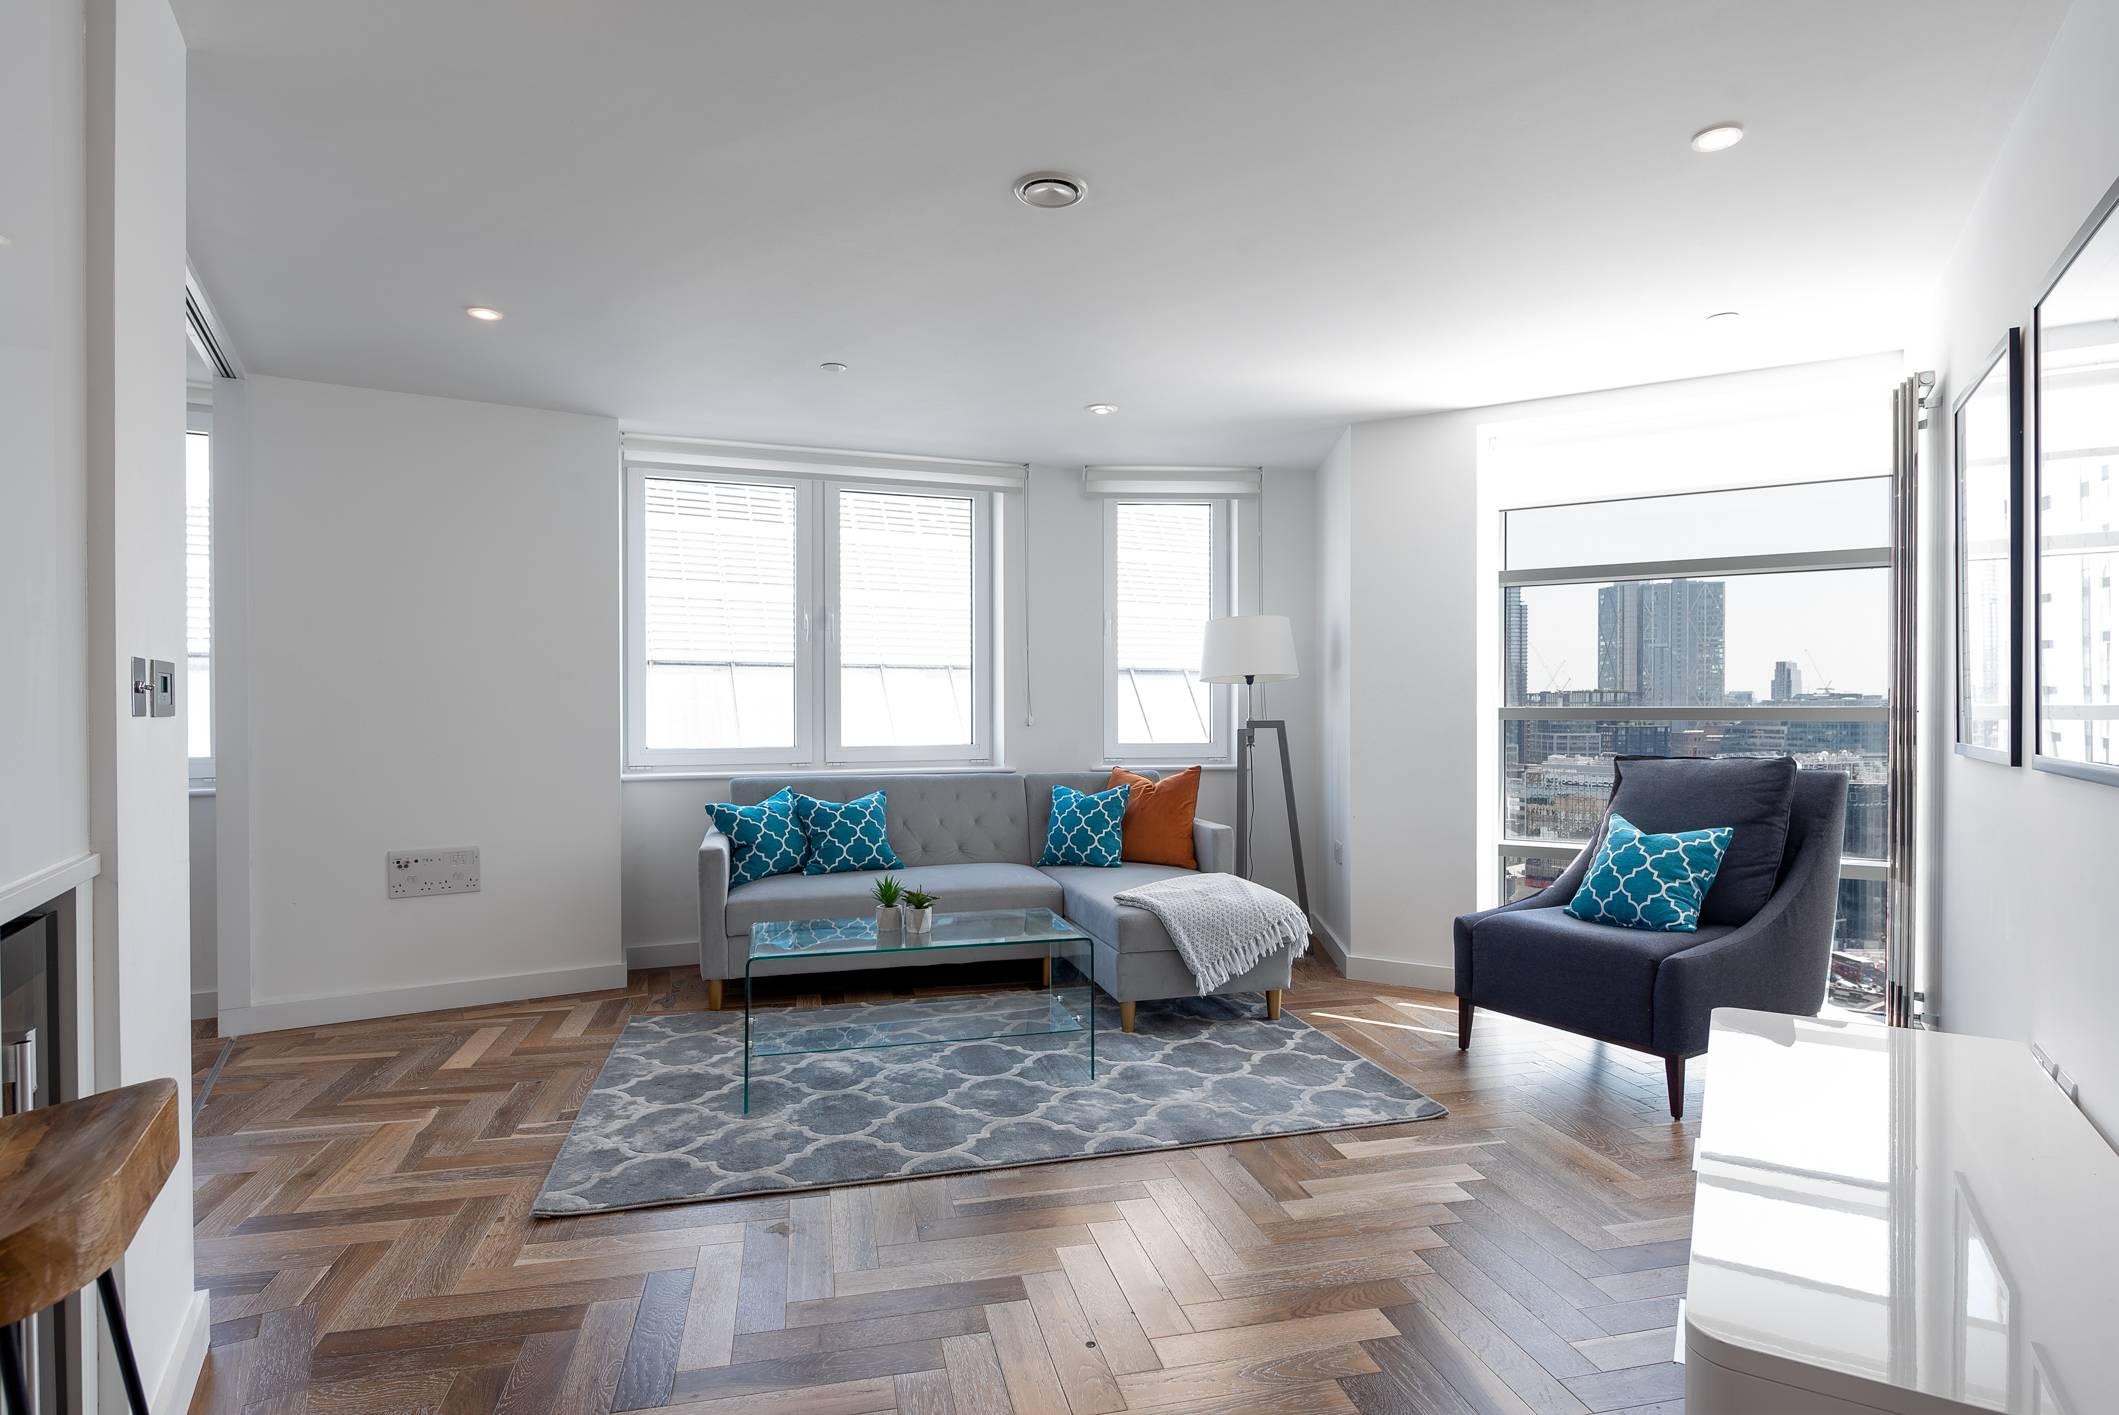 A modern 2-Bedroom apartment of 1,000 square feet on the 18th floor of this new development on City Road.